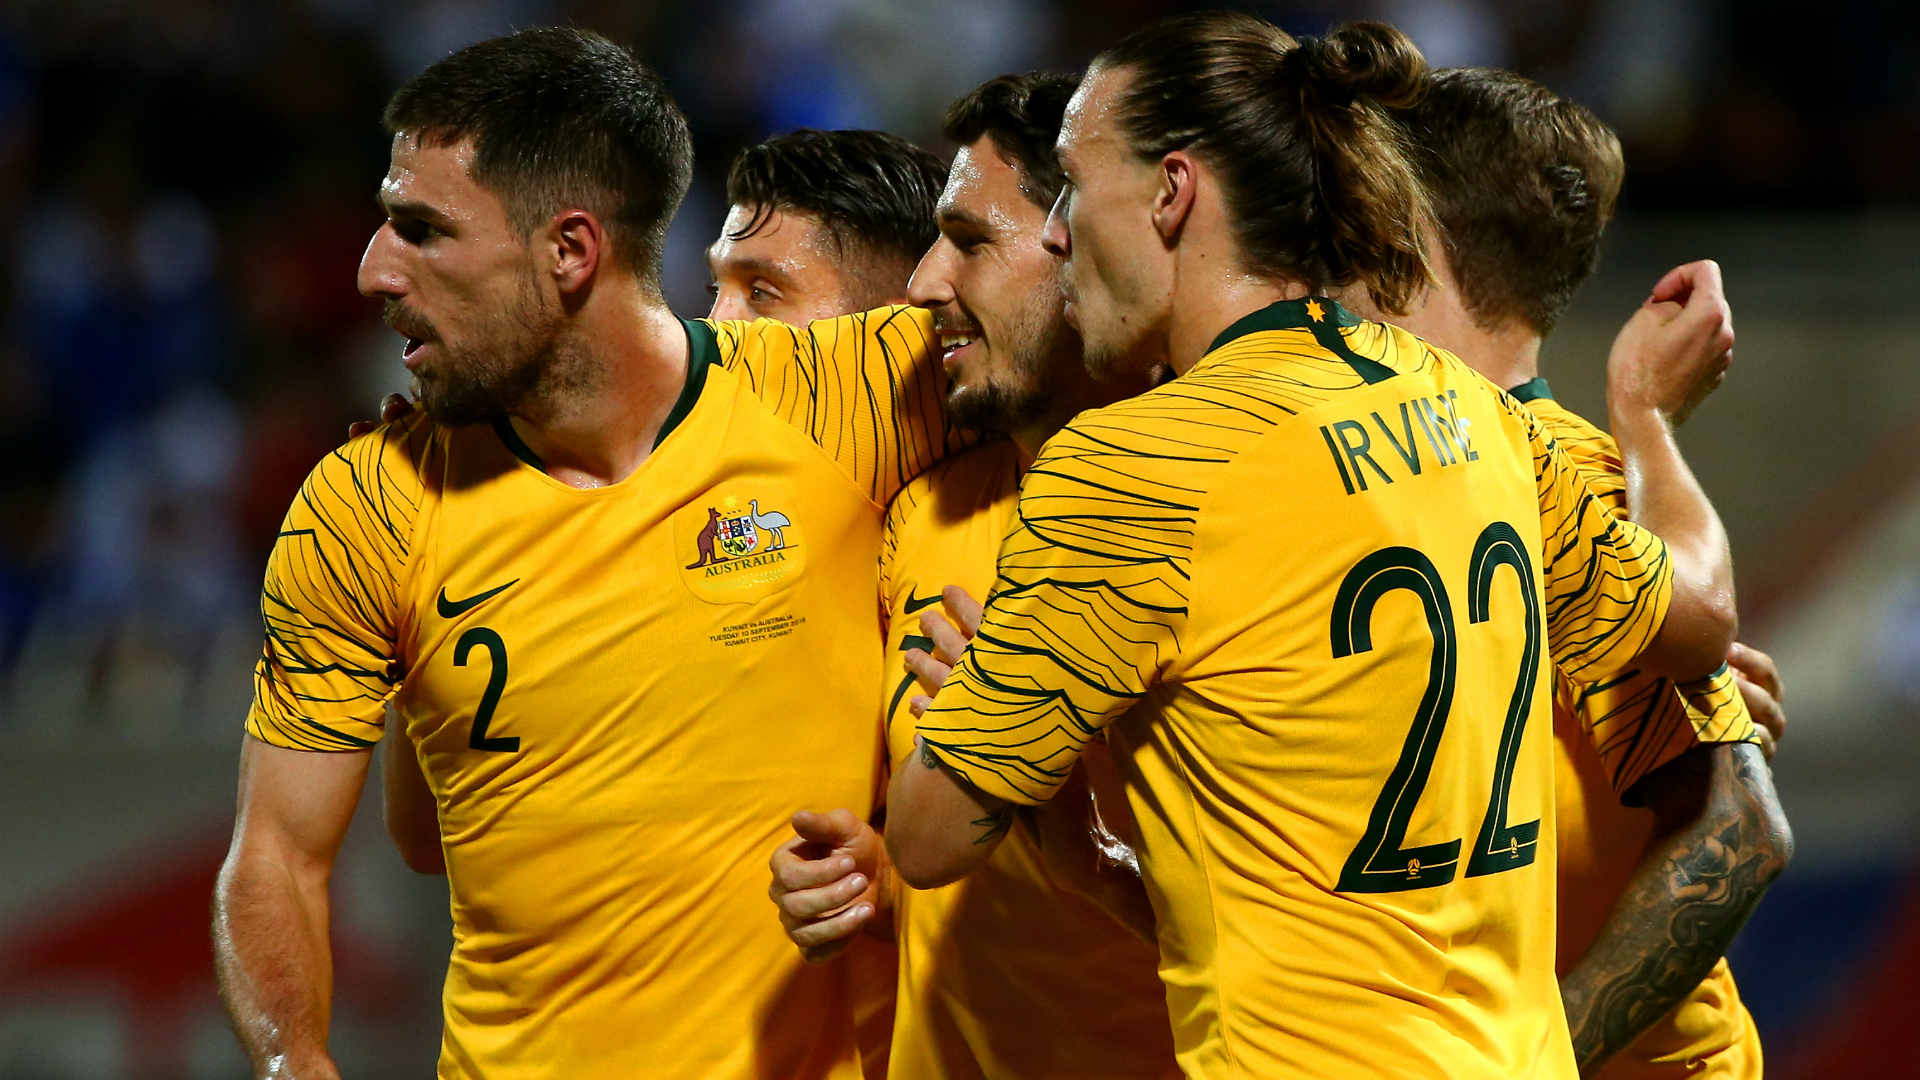 Socceroos news: Graham Arnold praises the squad's mentality after Australia thrashes Kuwait in the start of World Cup qualifying